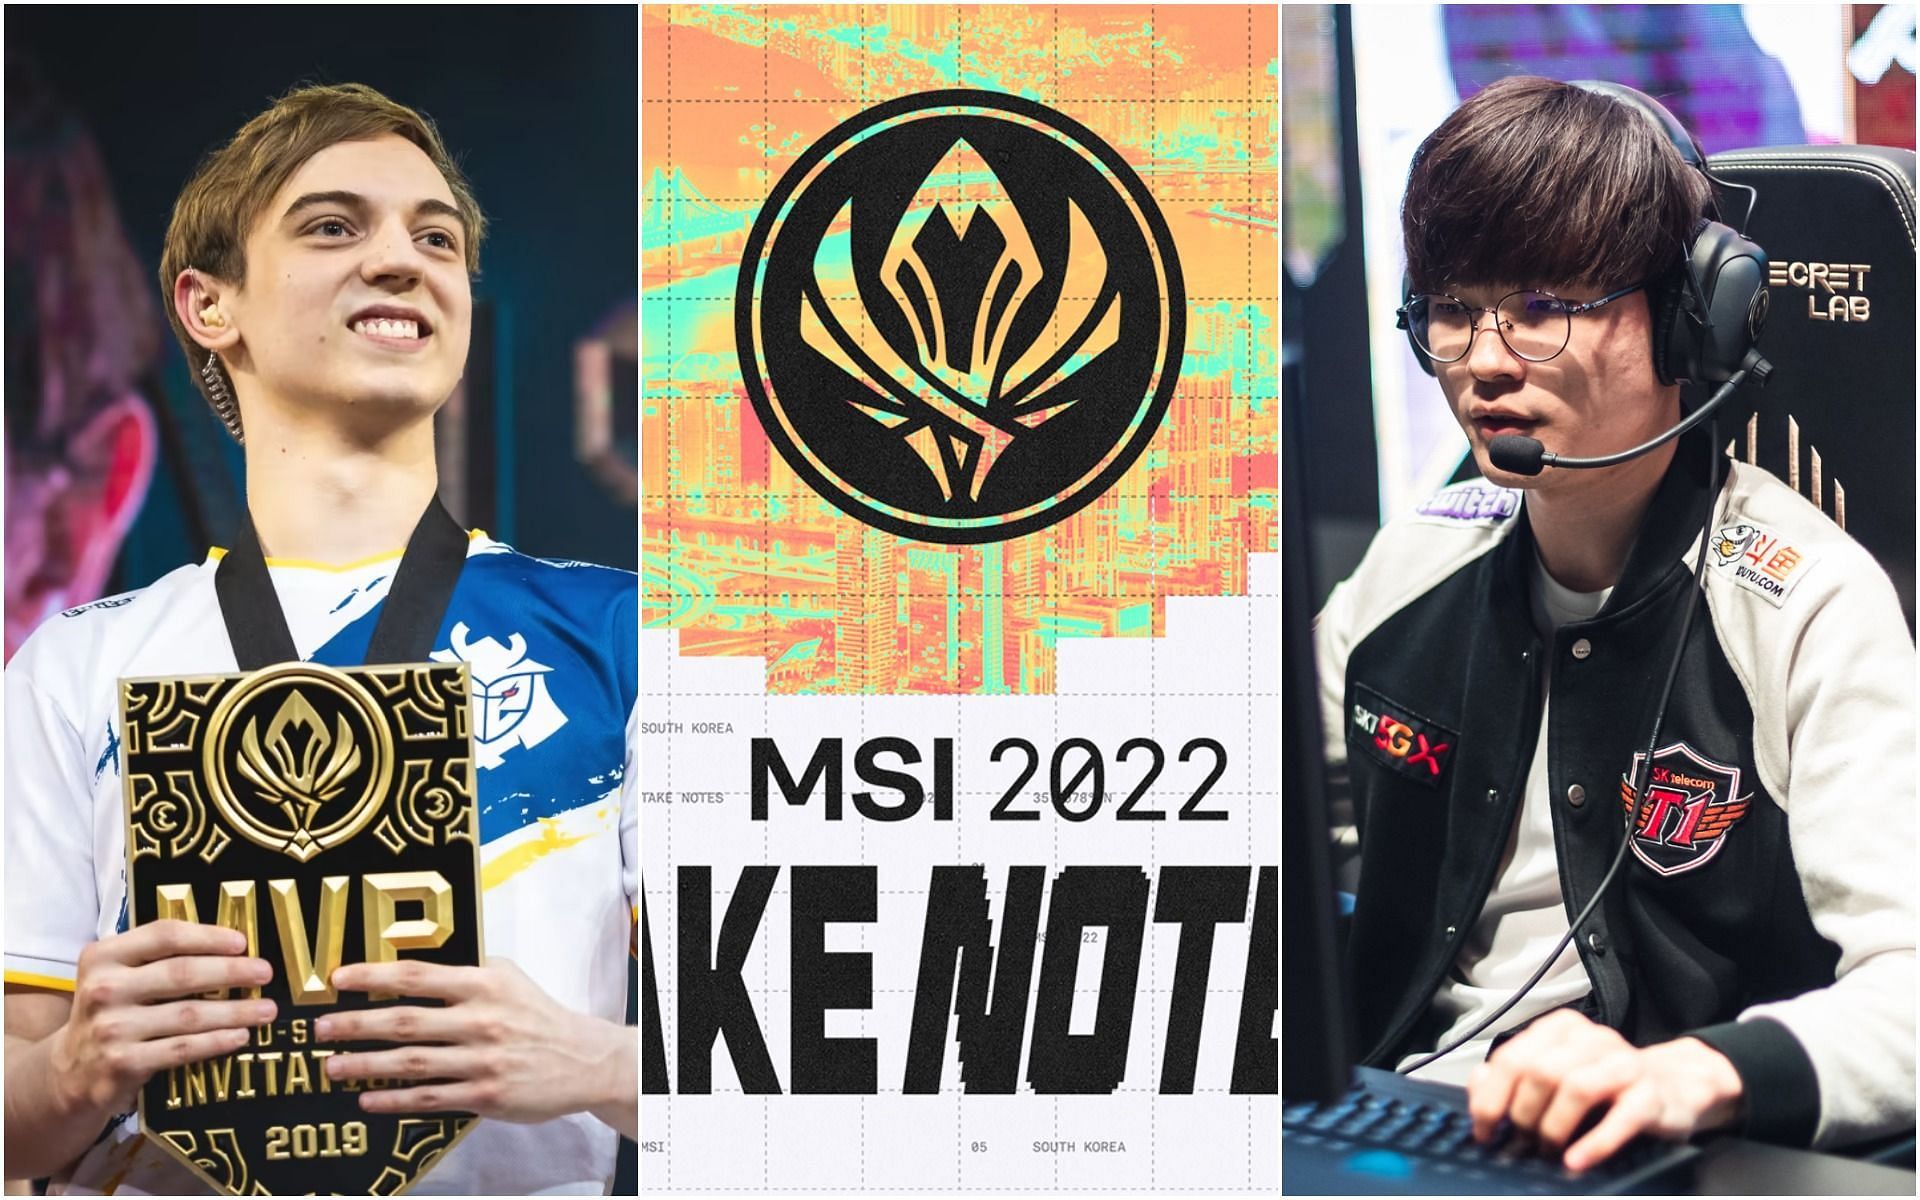 Full details about League of Legends MSI 2022 (Image via Riot Games)